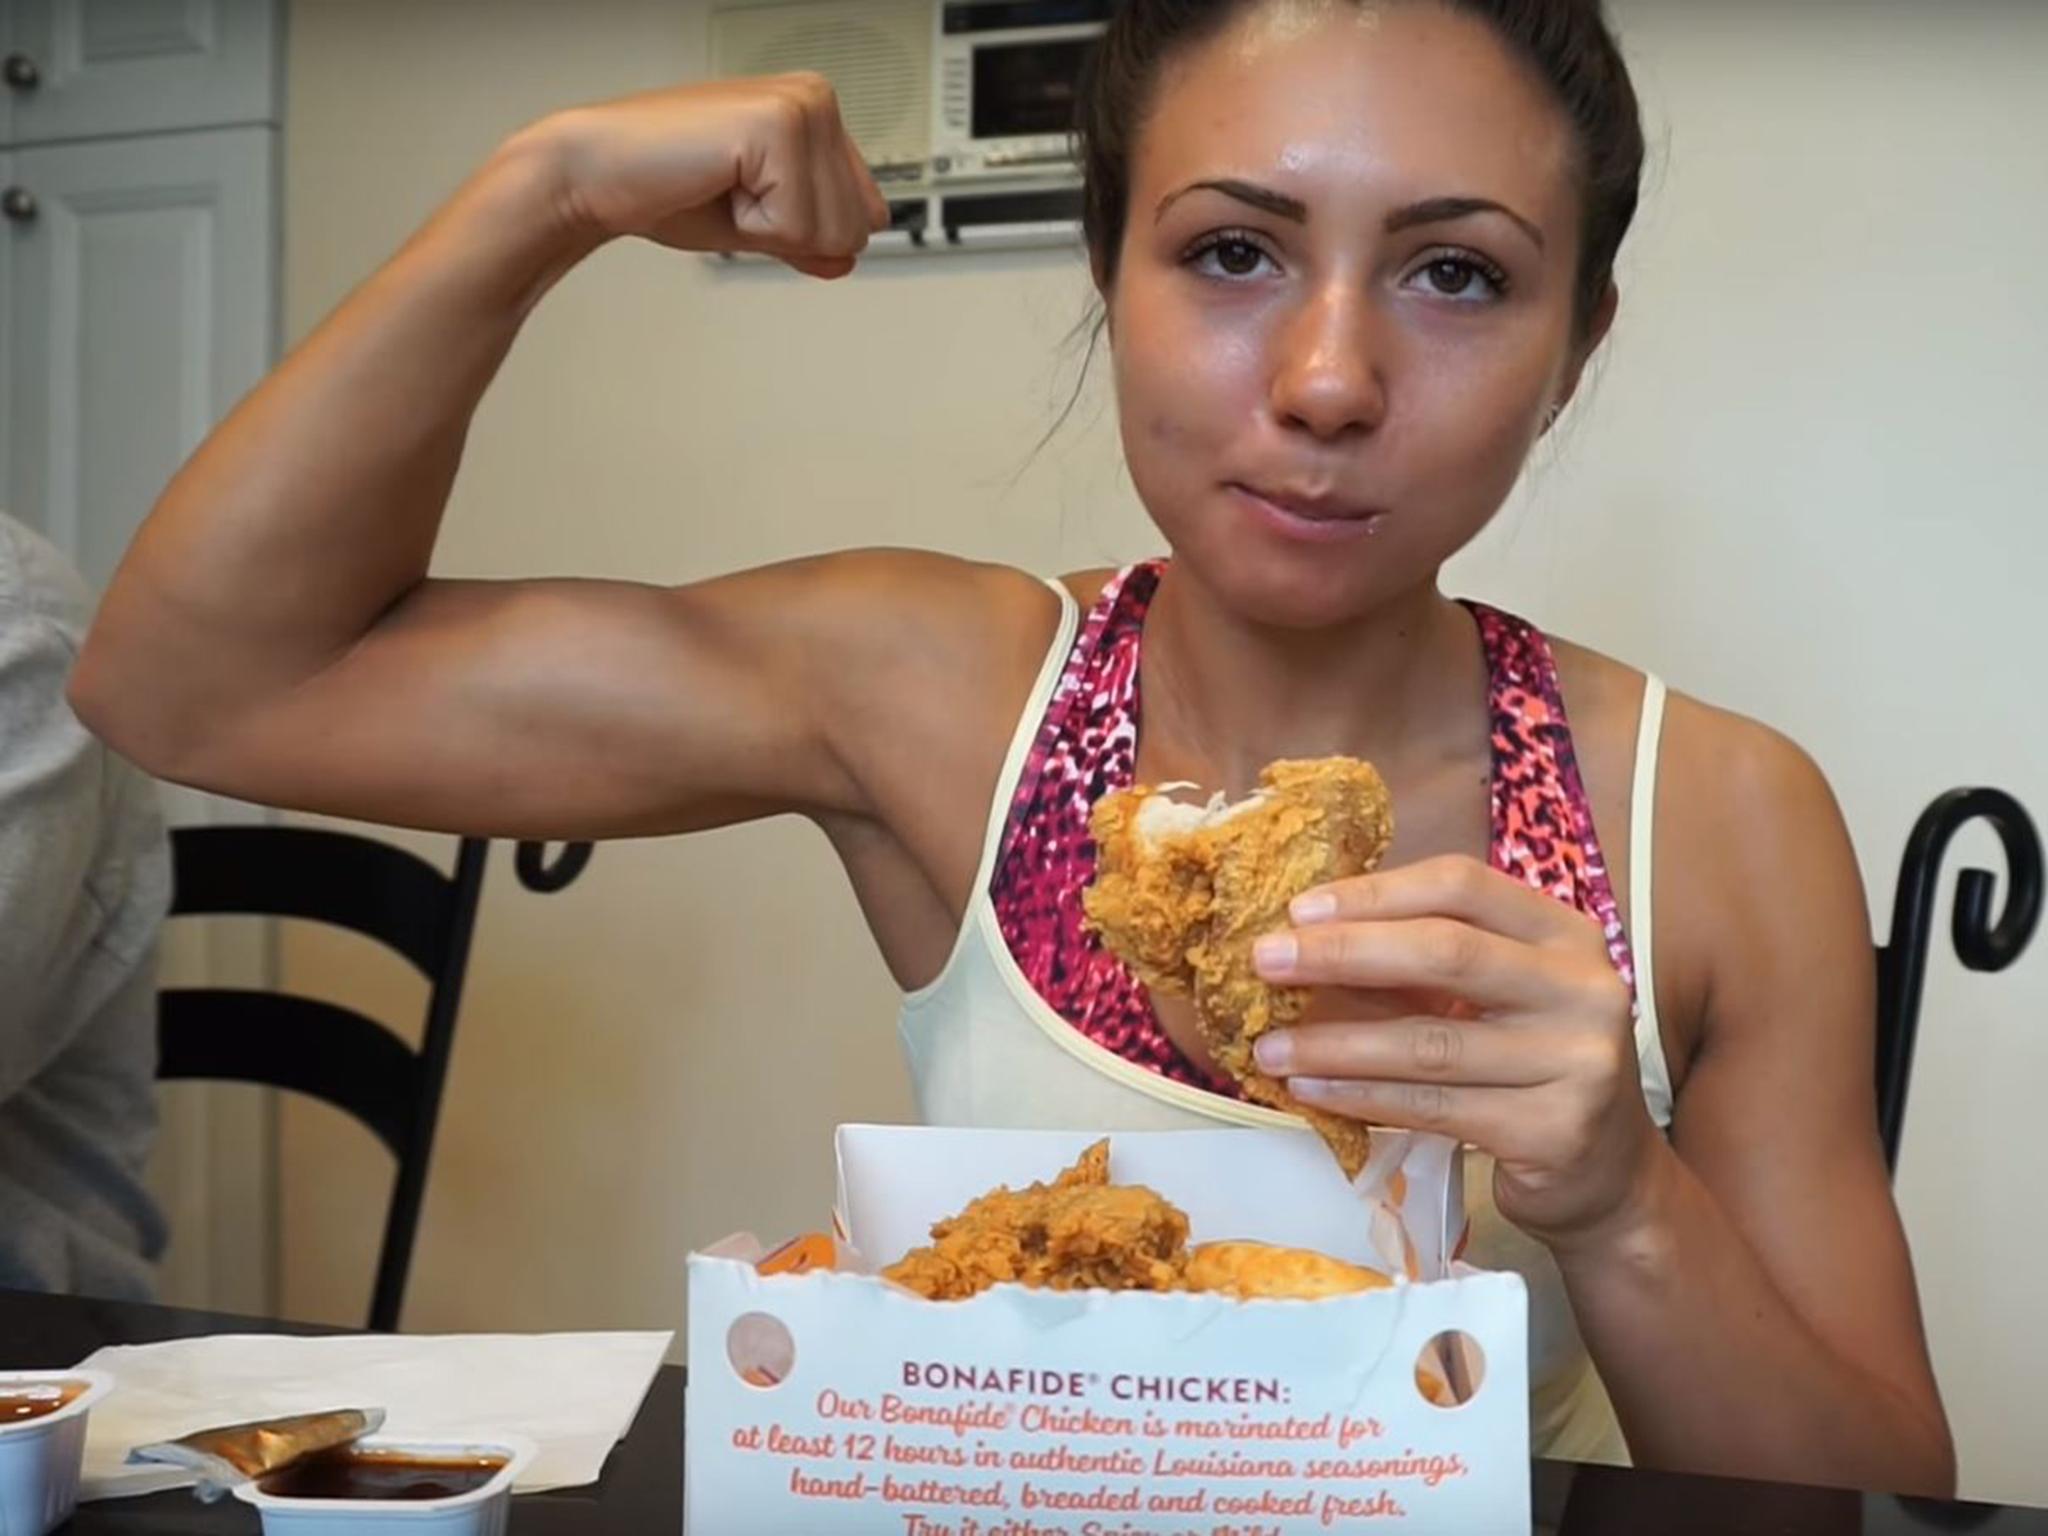 Ashley Nocera tucks into some fried chicken during her challenge